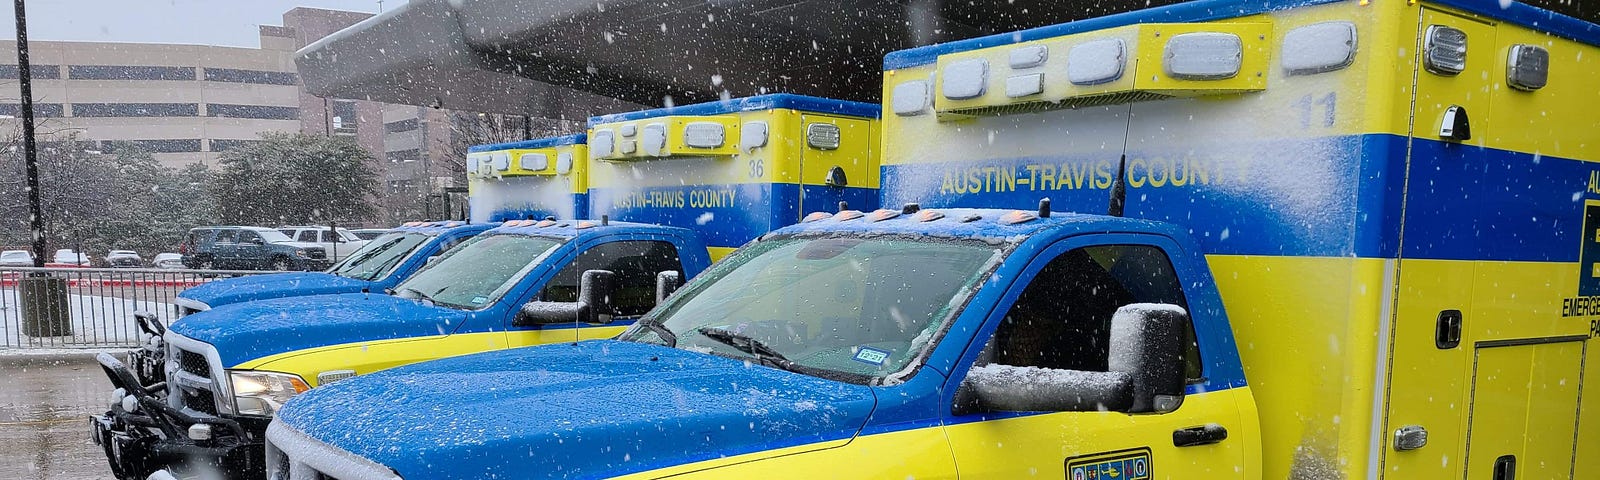 Two ambulances are parked outside a station during a snow storm.